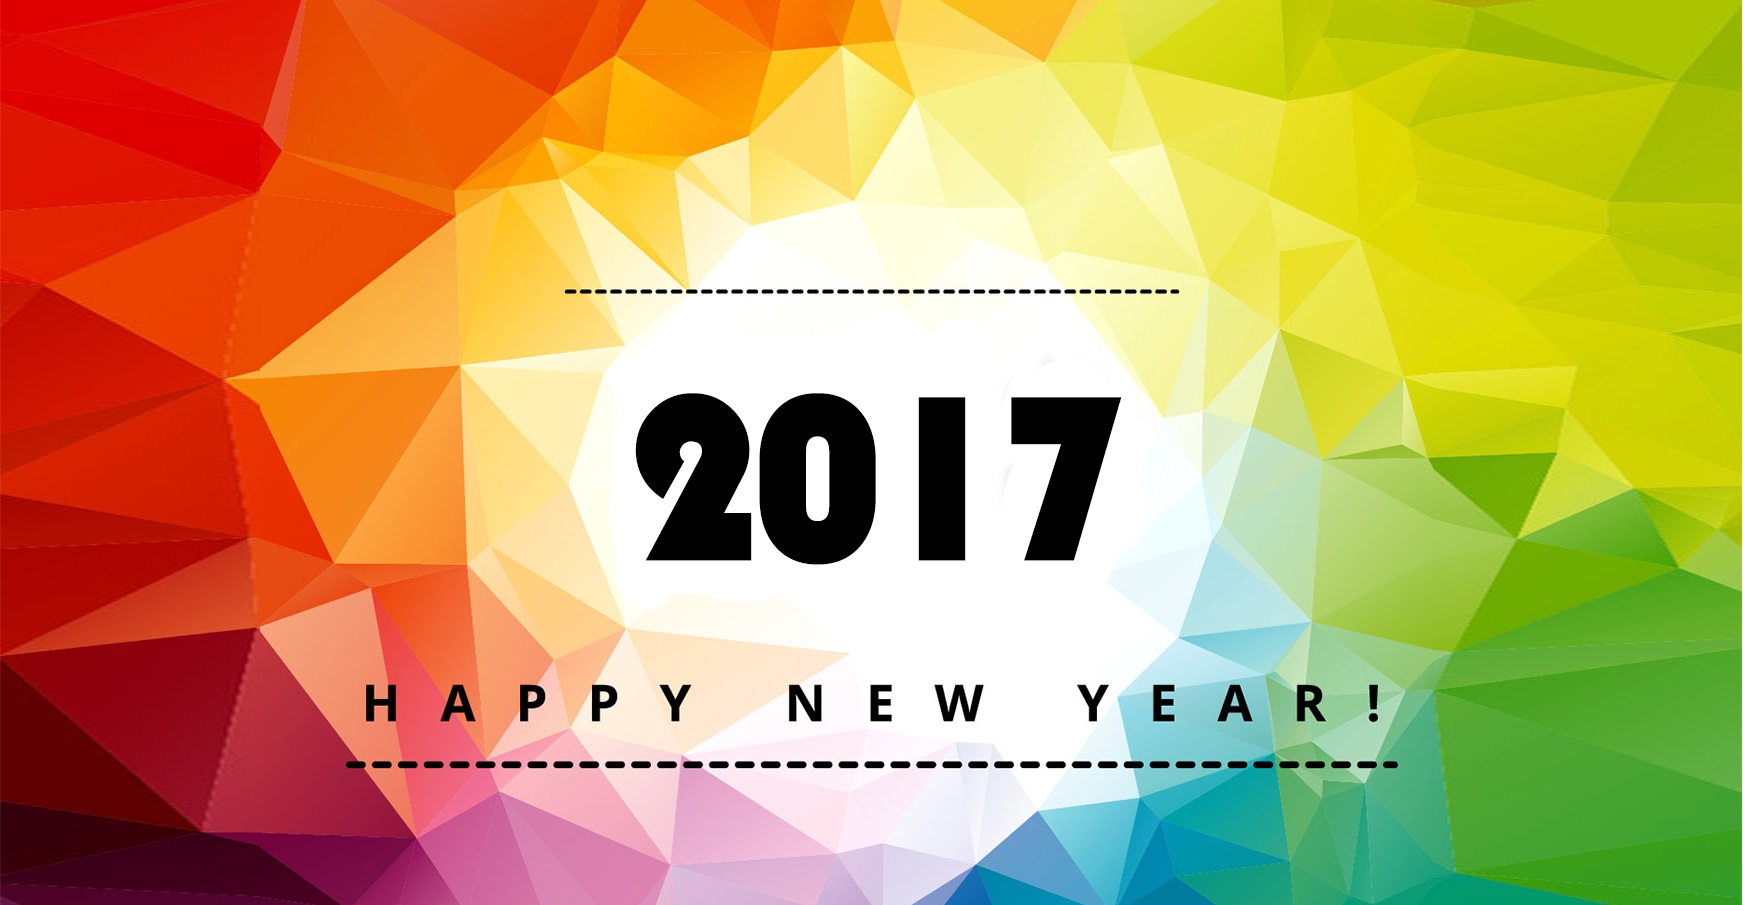 192 Pixel Wallpaper For Whatsapp - Happy New Year 2017 Facebook Cover , HD Wallpaper & Backgrounds